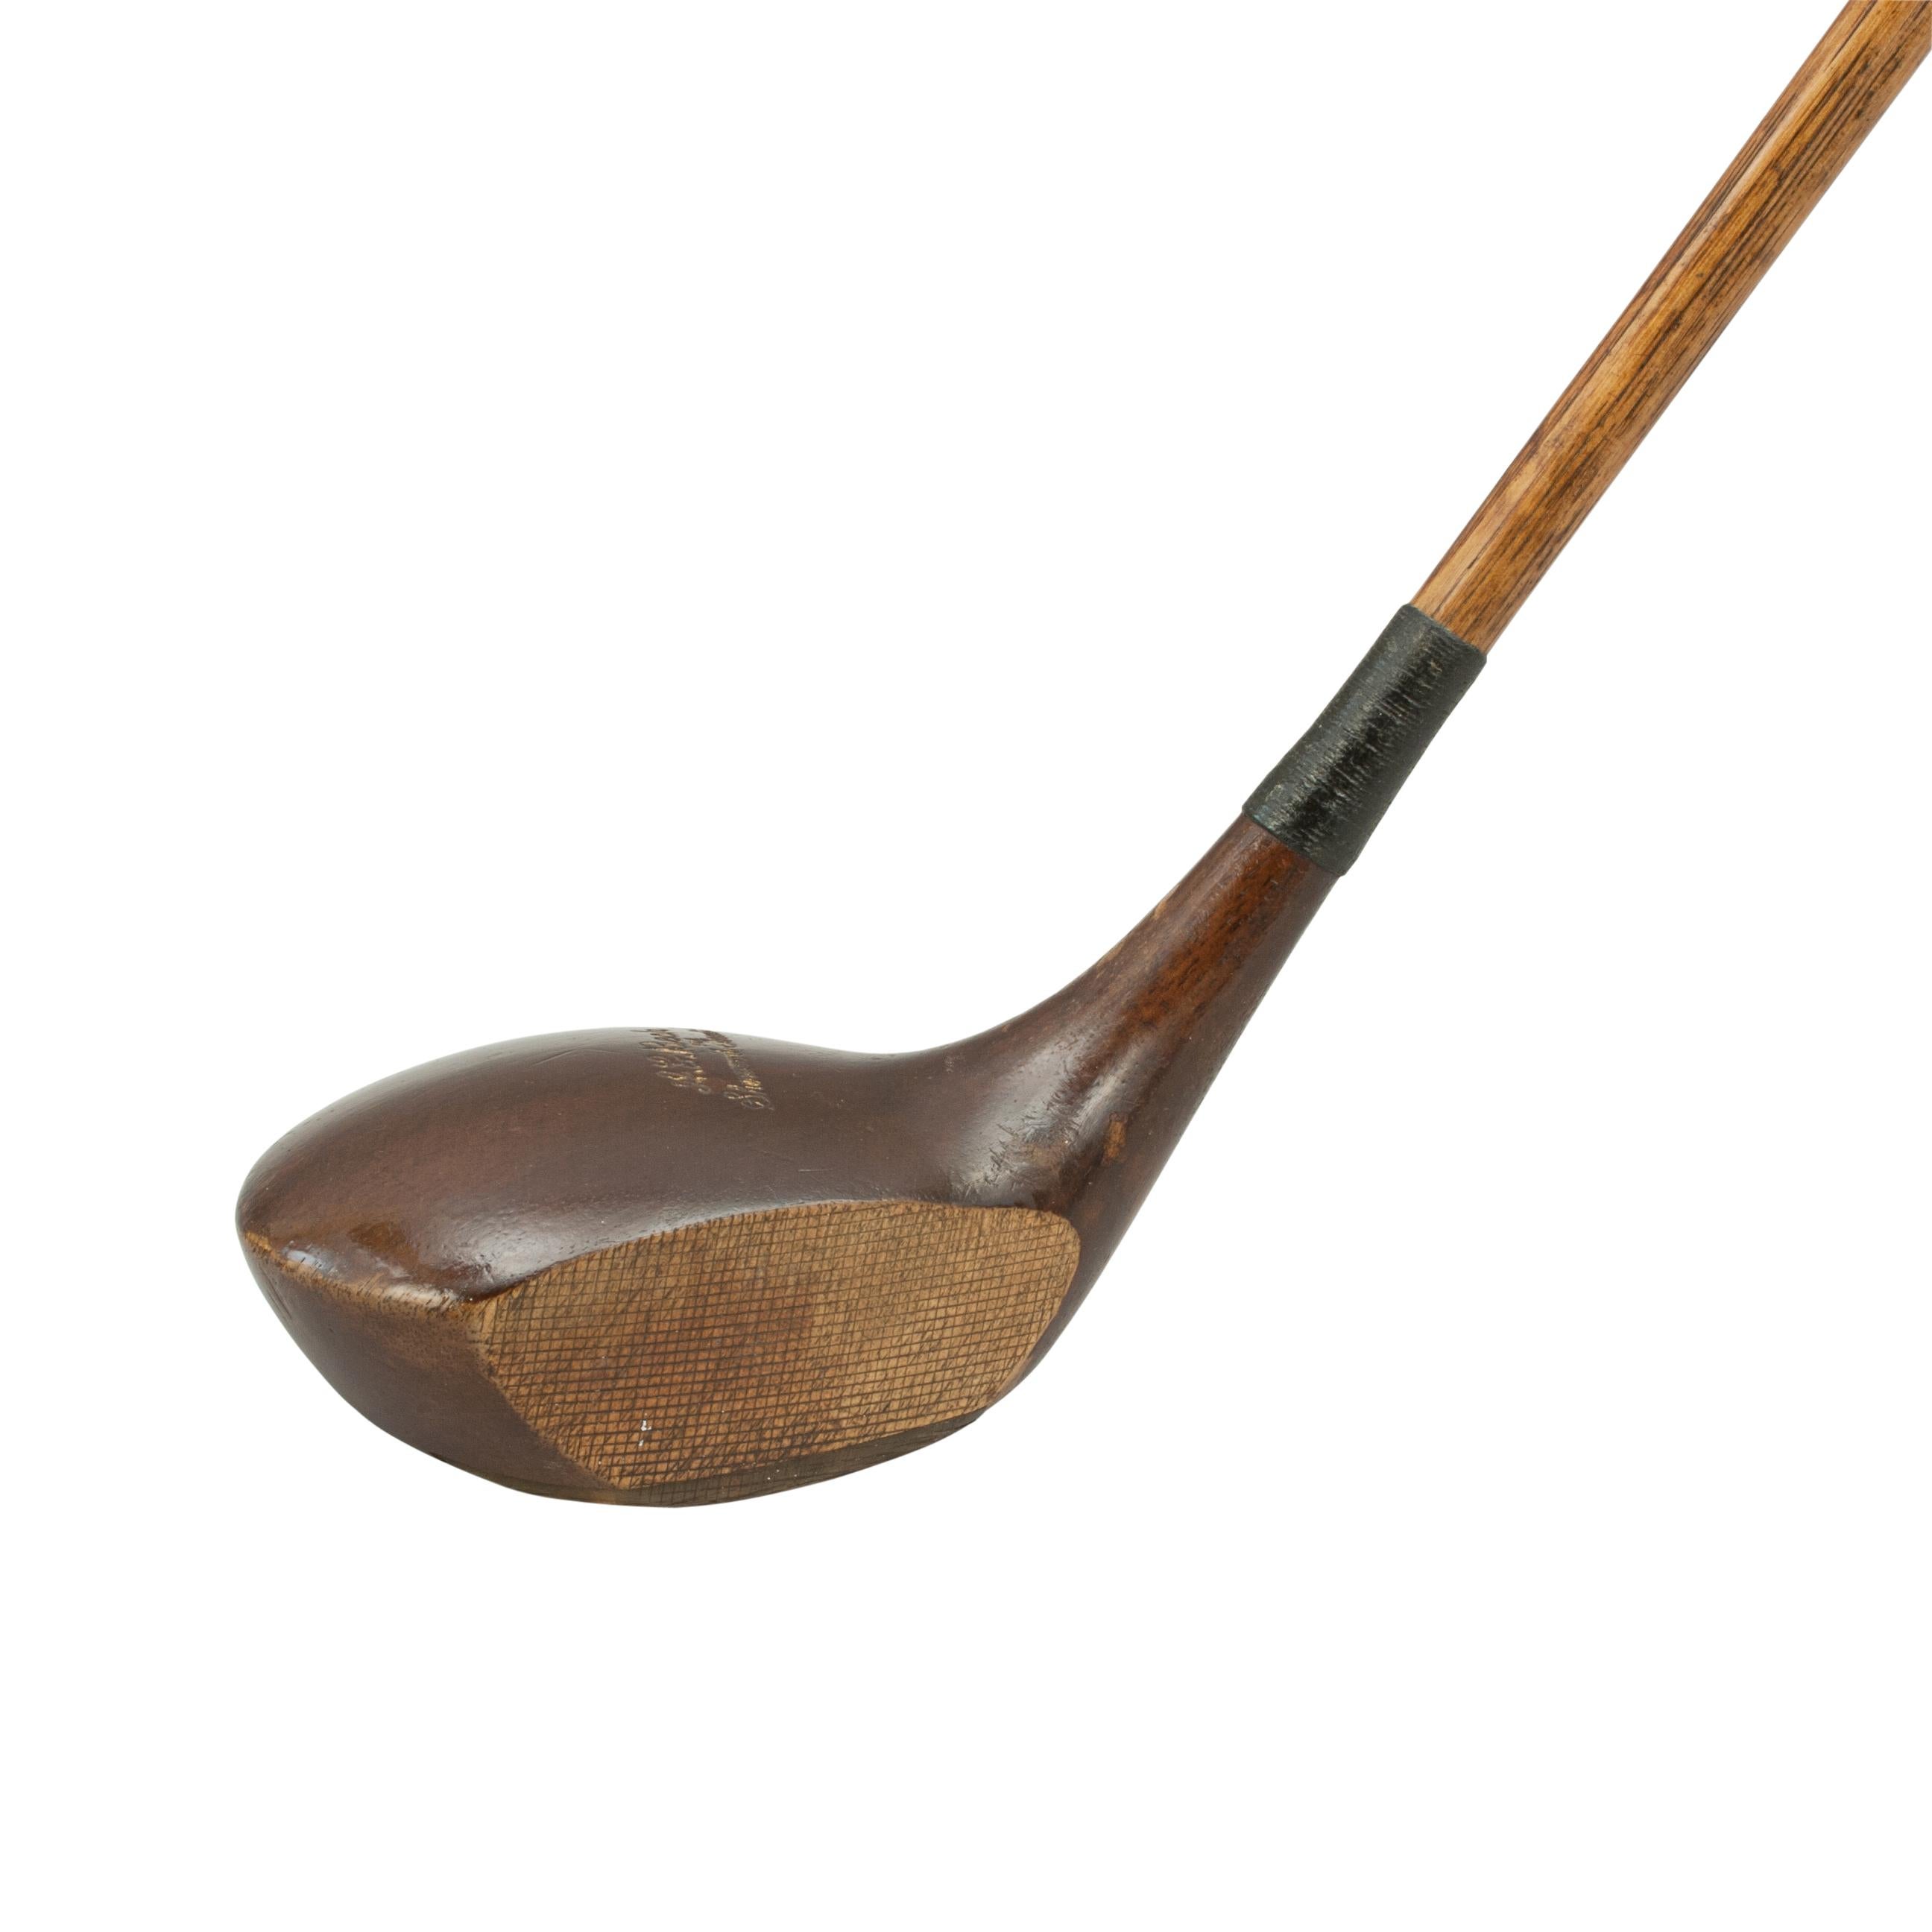 Hickory Golf Club, Sherwood Forest G.C.
A good persimmon wood hickory shafted driver by Alfred Gibson Bech. The club head marked with Bech's name and Sherwood Forest G.C. The club has a polished leather grip and the head has a lead weight to the